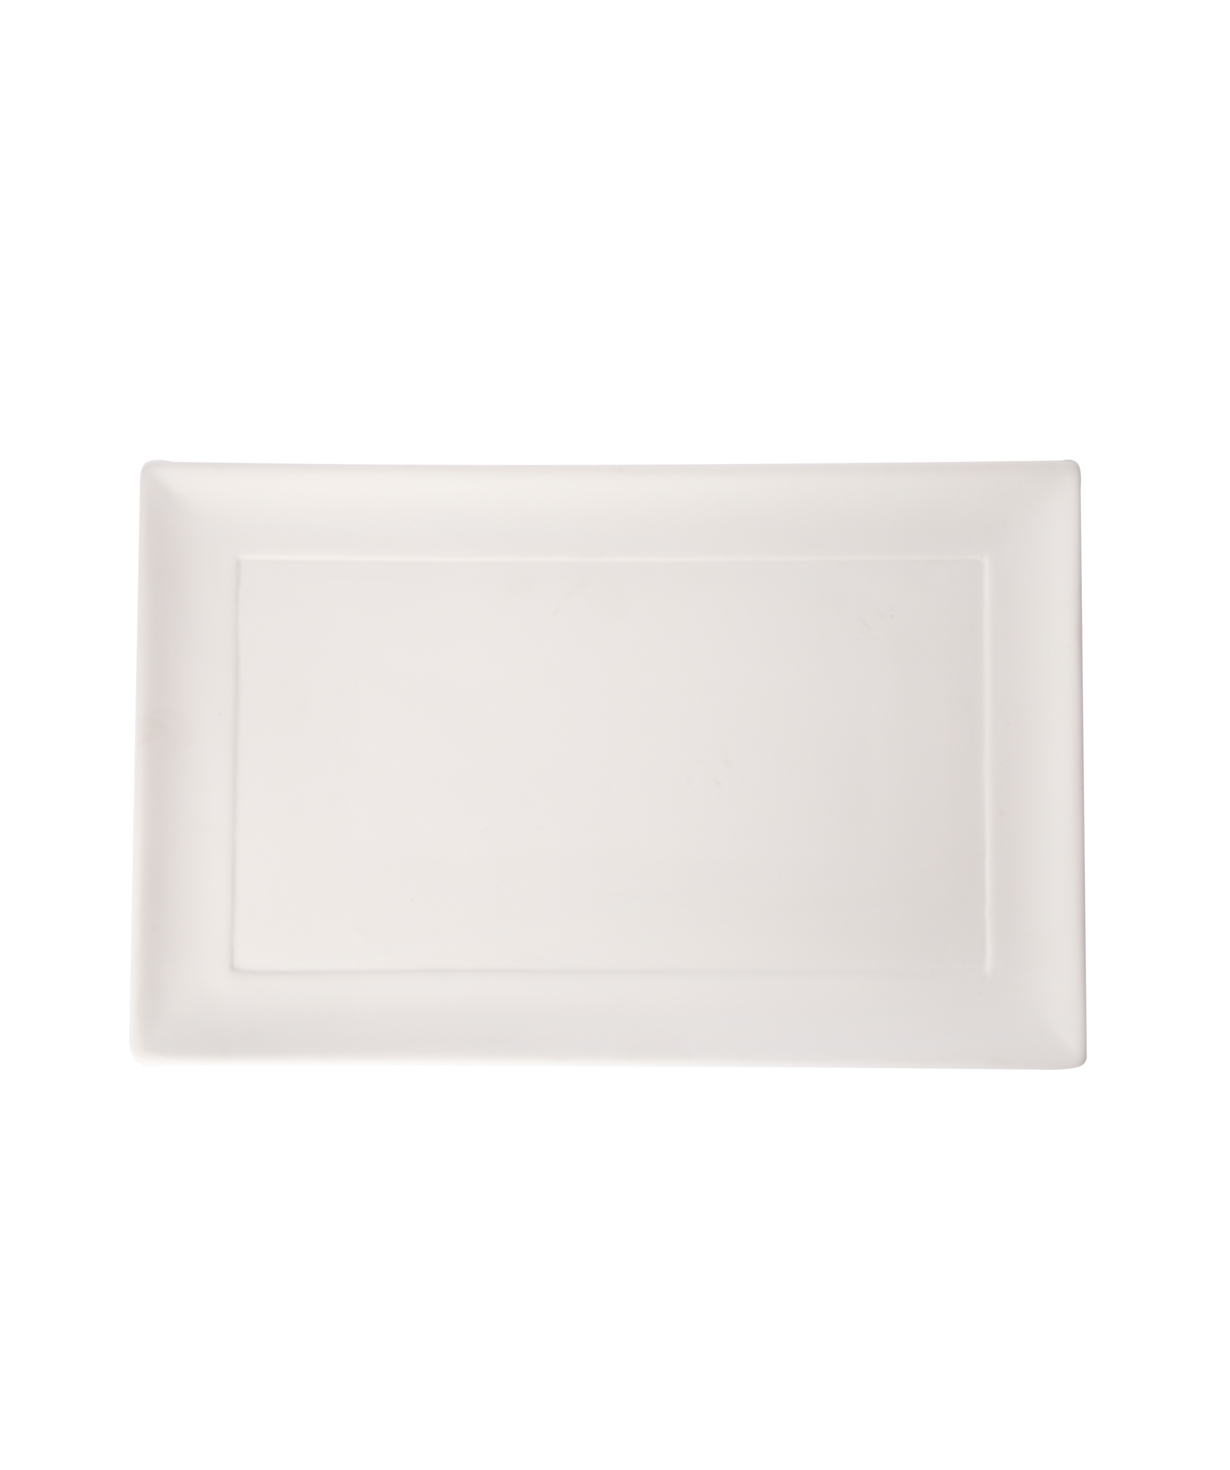 Collection `Yes Republic` art, rectangular plate